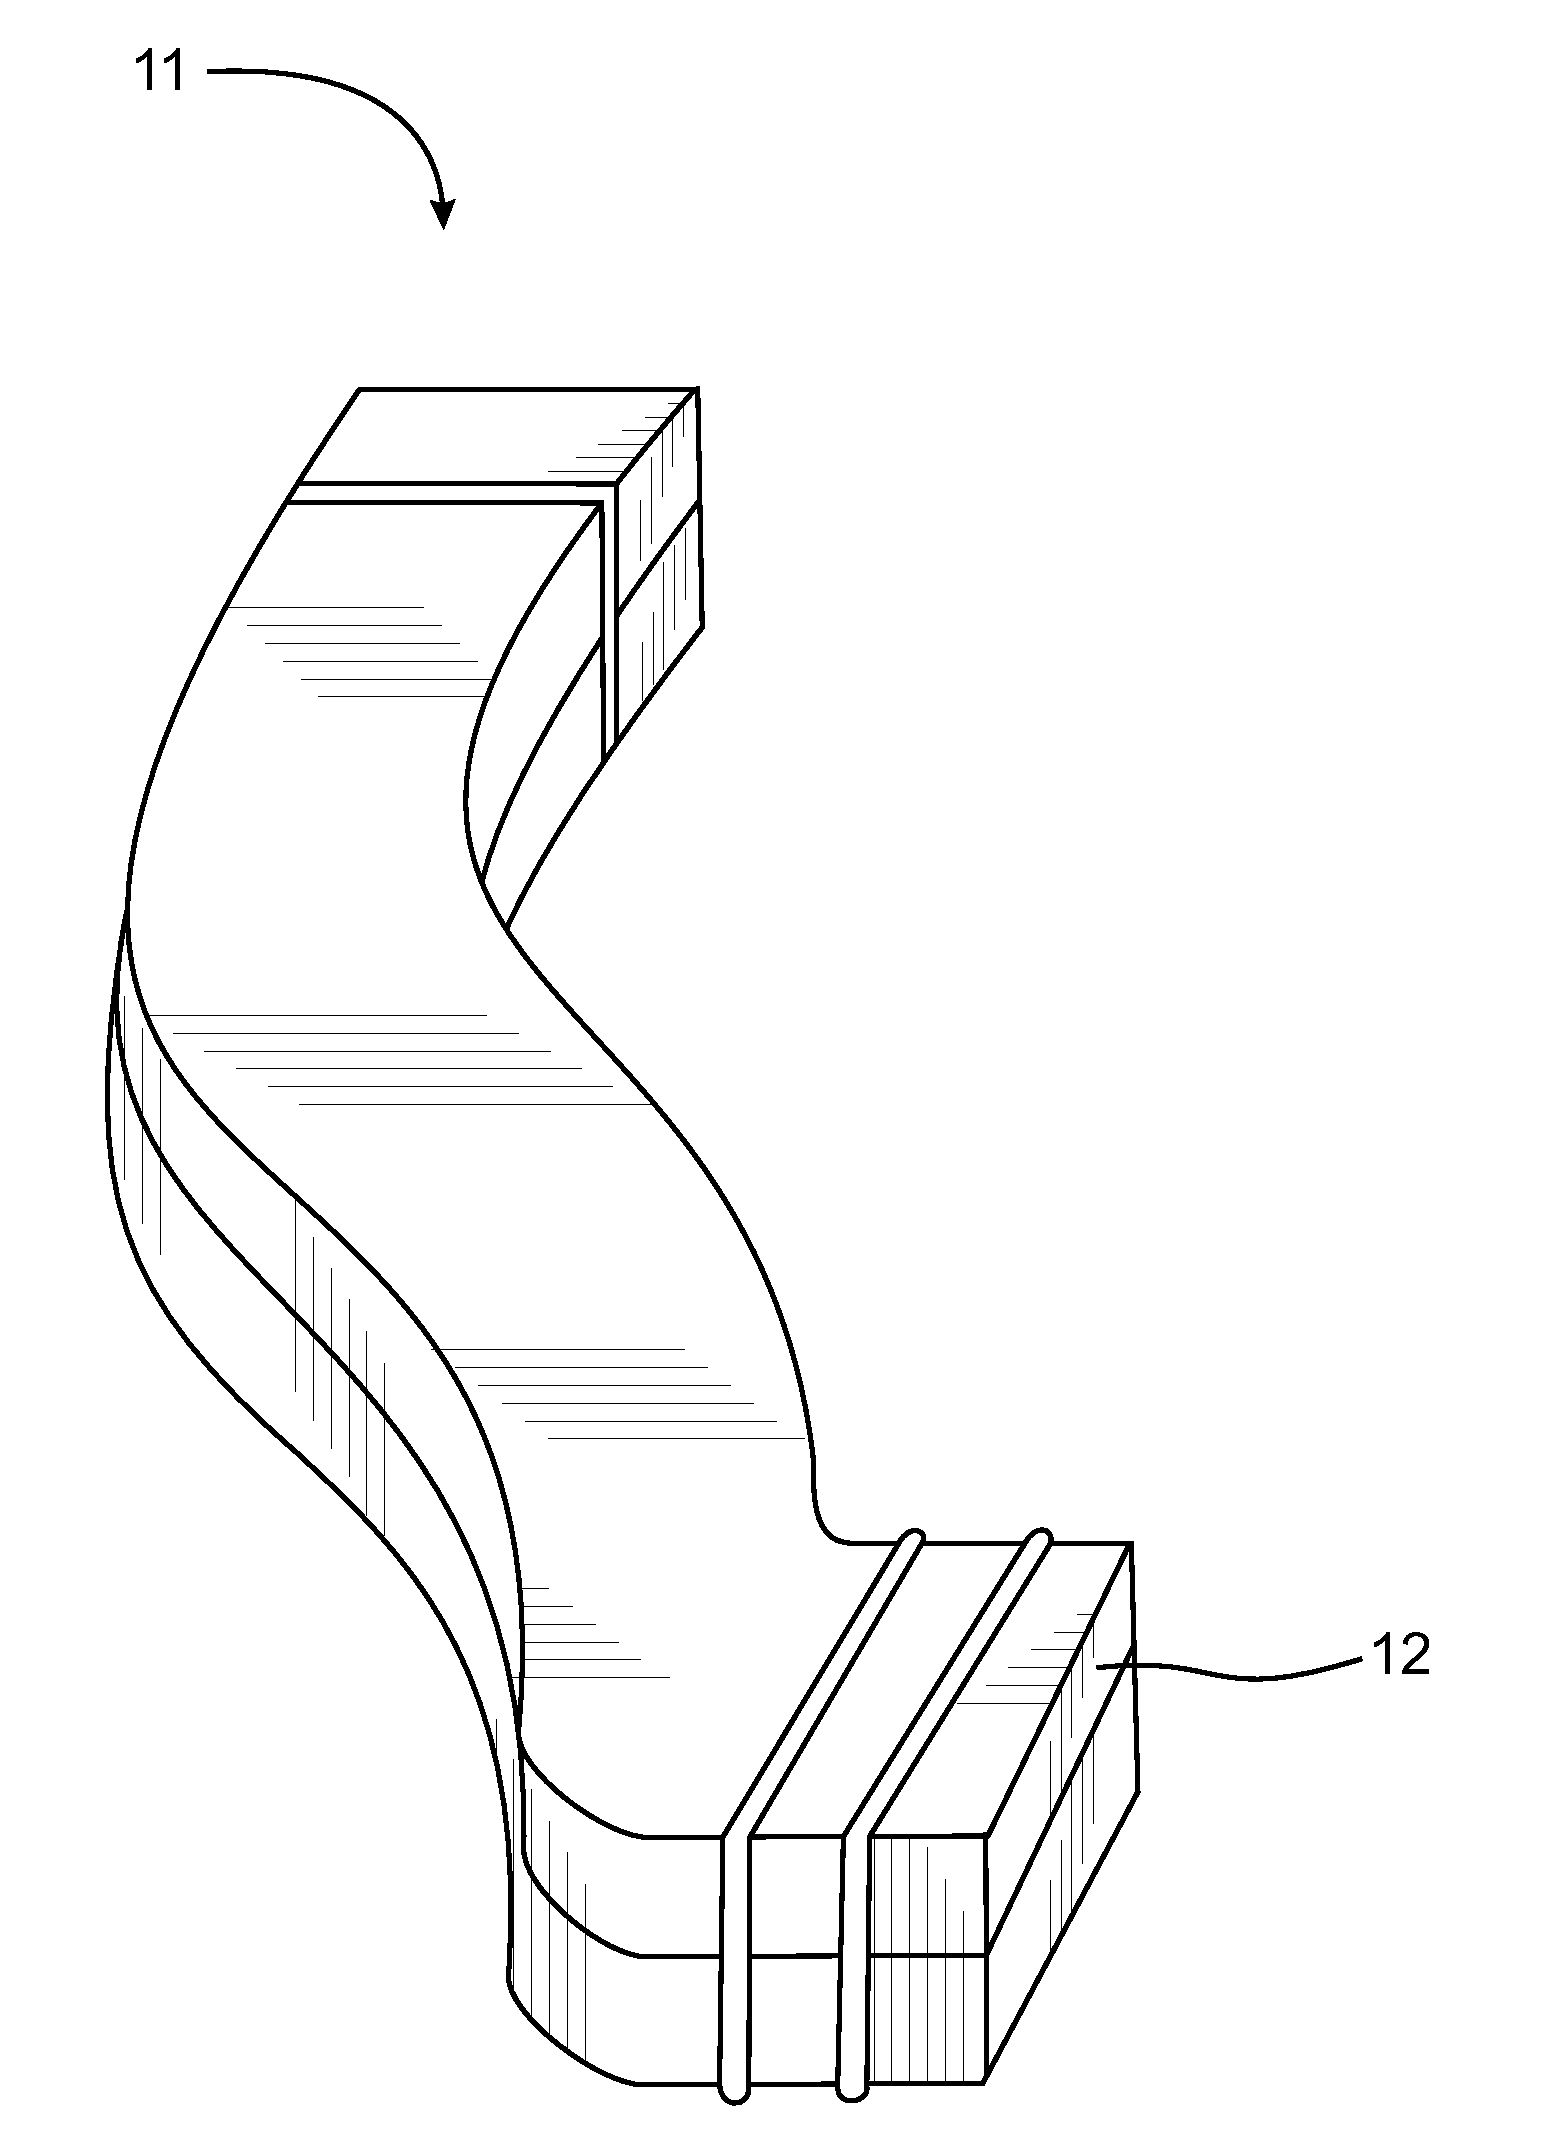 Method for manufacturing molded foam